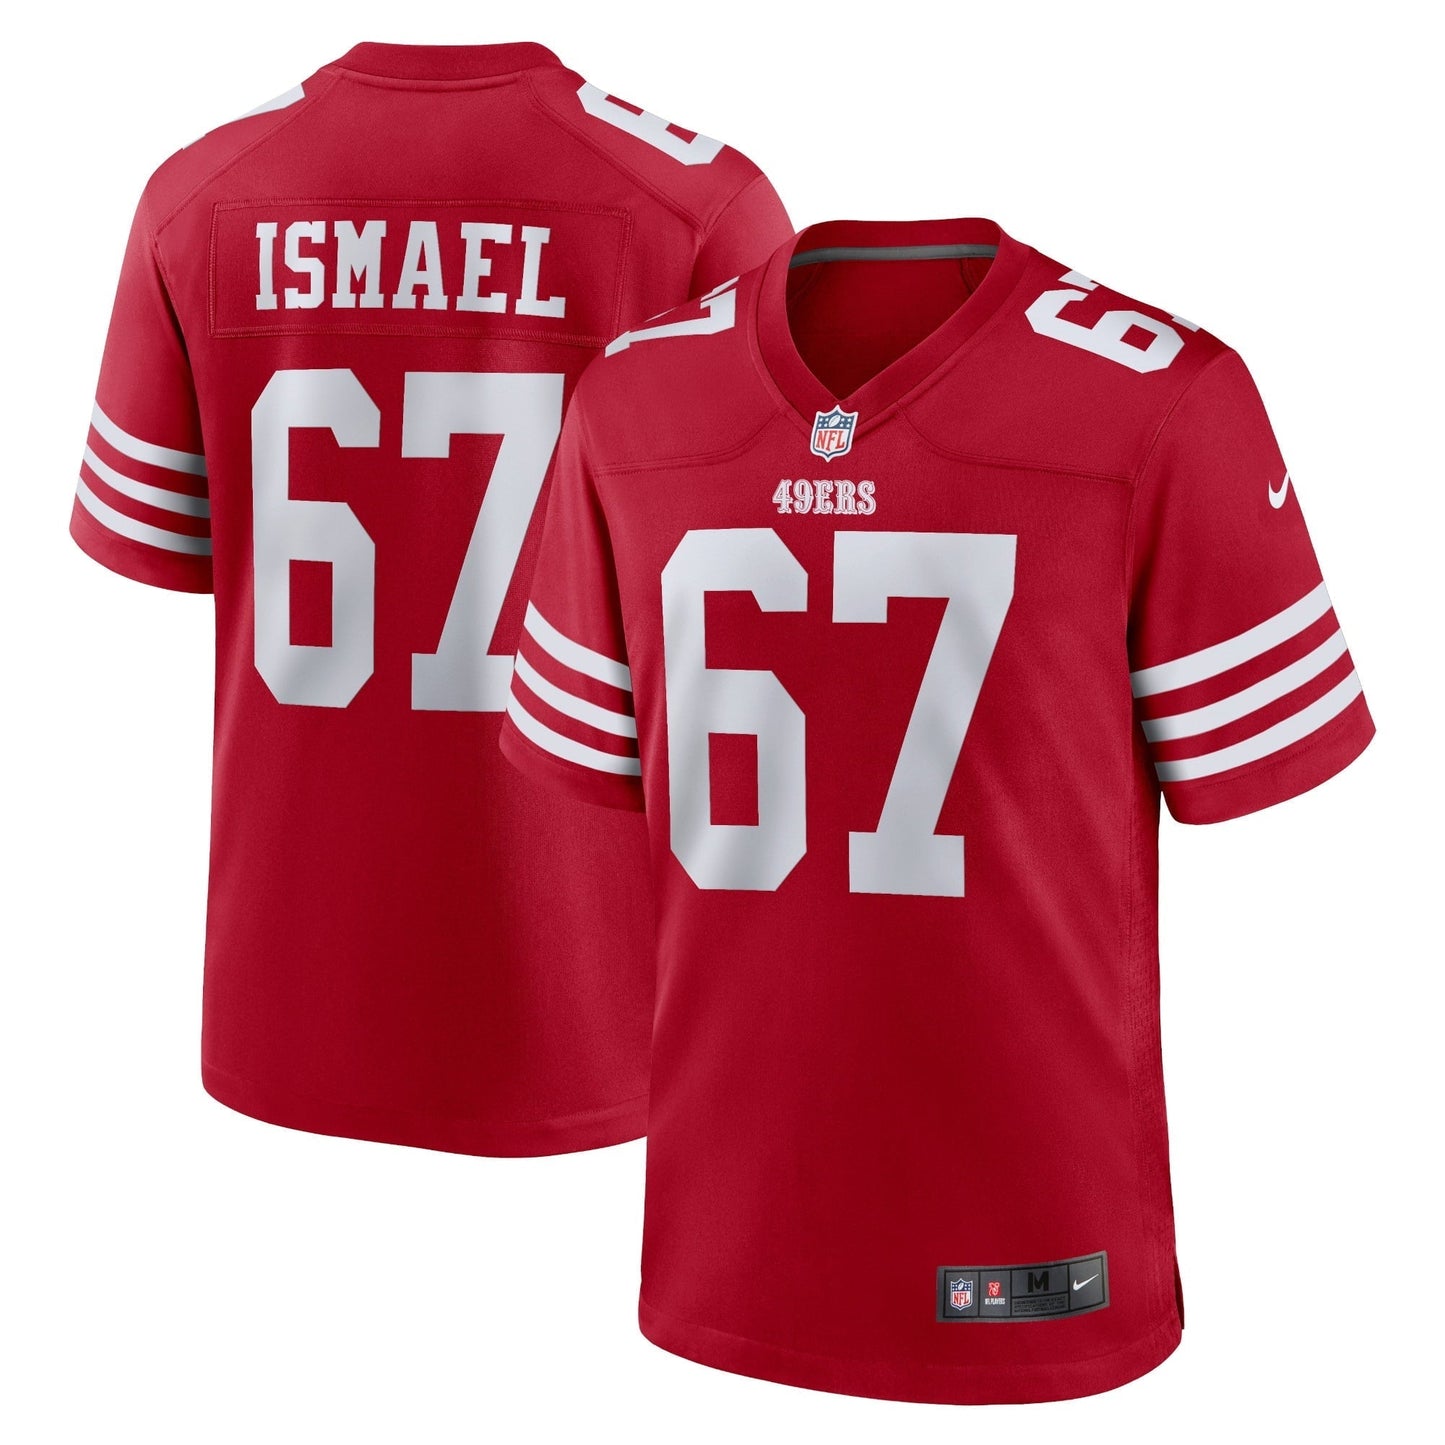 Men's Nike Keith Ismael Scarlet San Francisco 49ers Home Game Player Jersey